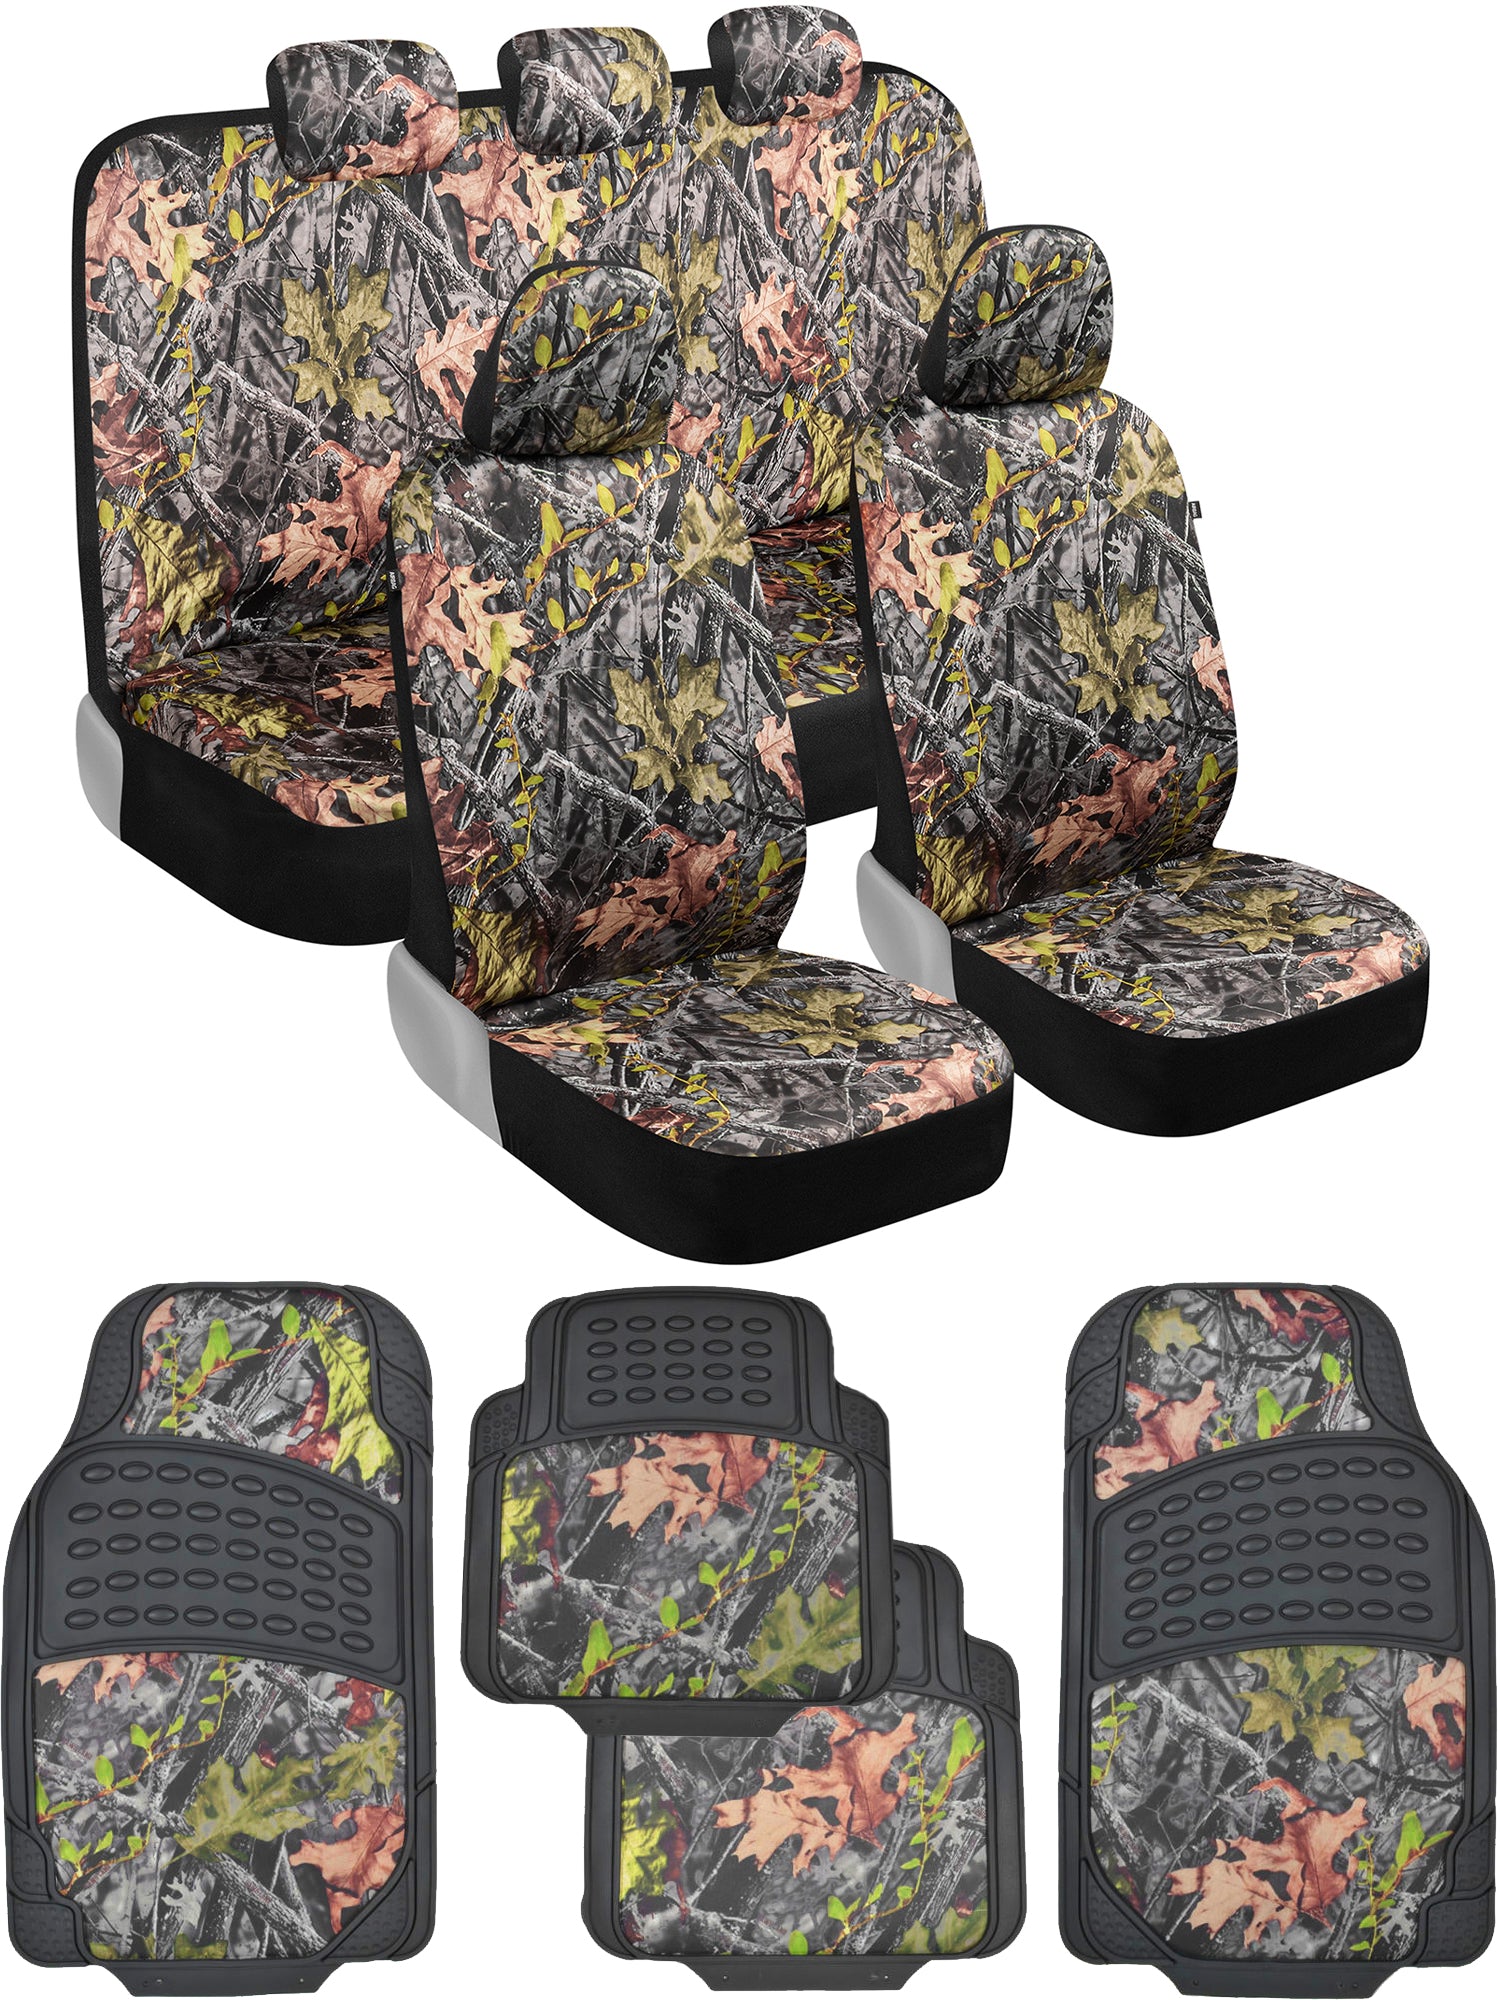 BDK Camo Car Seat Covers Full Set with Camo Car Floor Mats – Complete Interior Protection Set, Realistic Green Forest Camouflage Pattern, Camoflauge Interior Accessories for Auto Truck Van & SUV